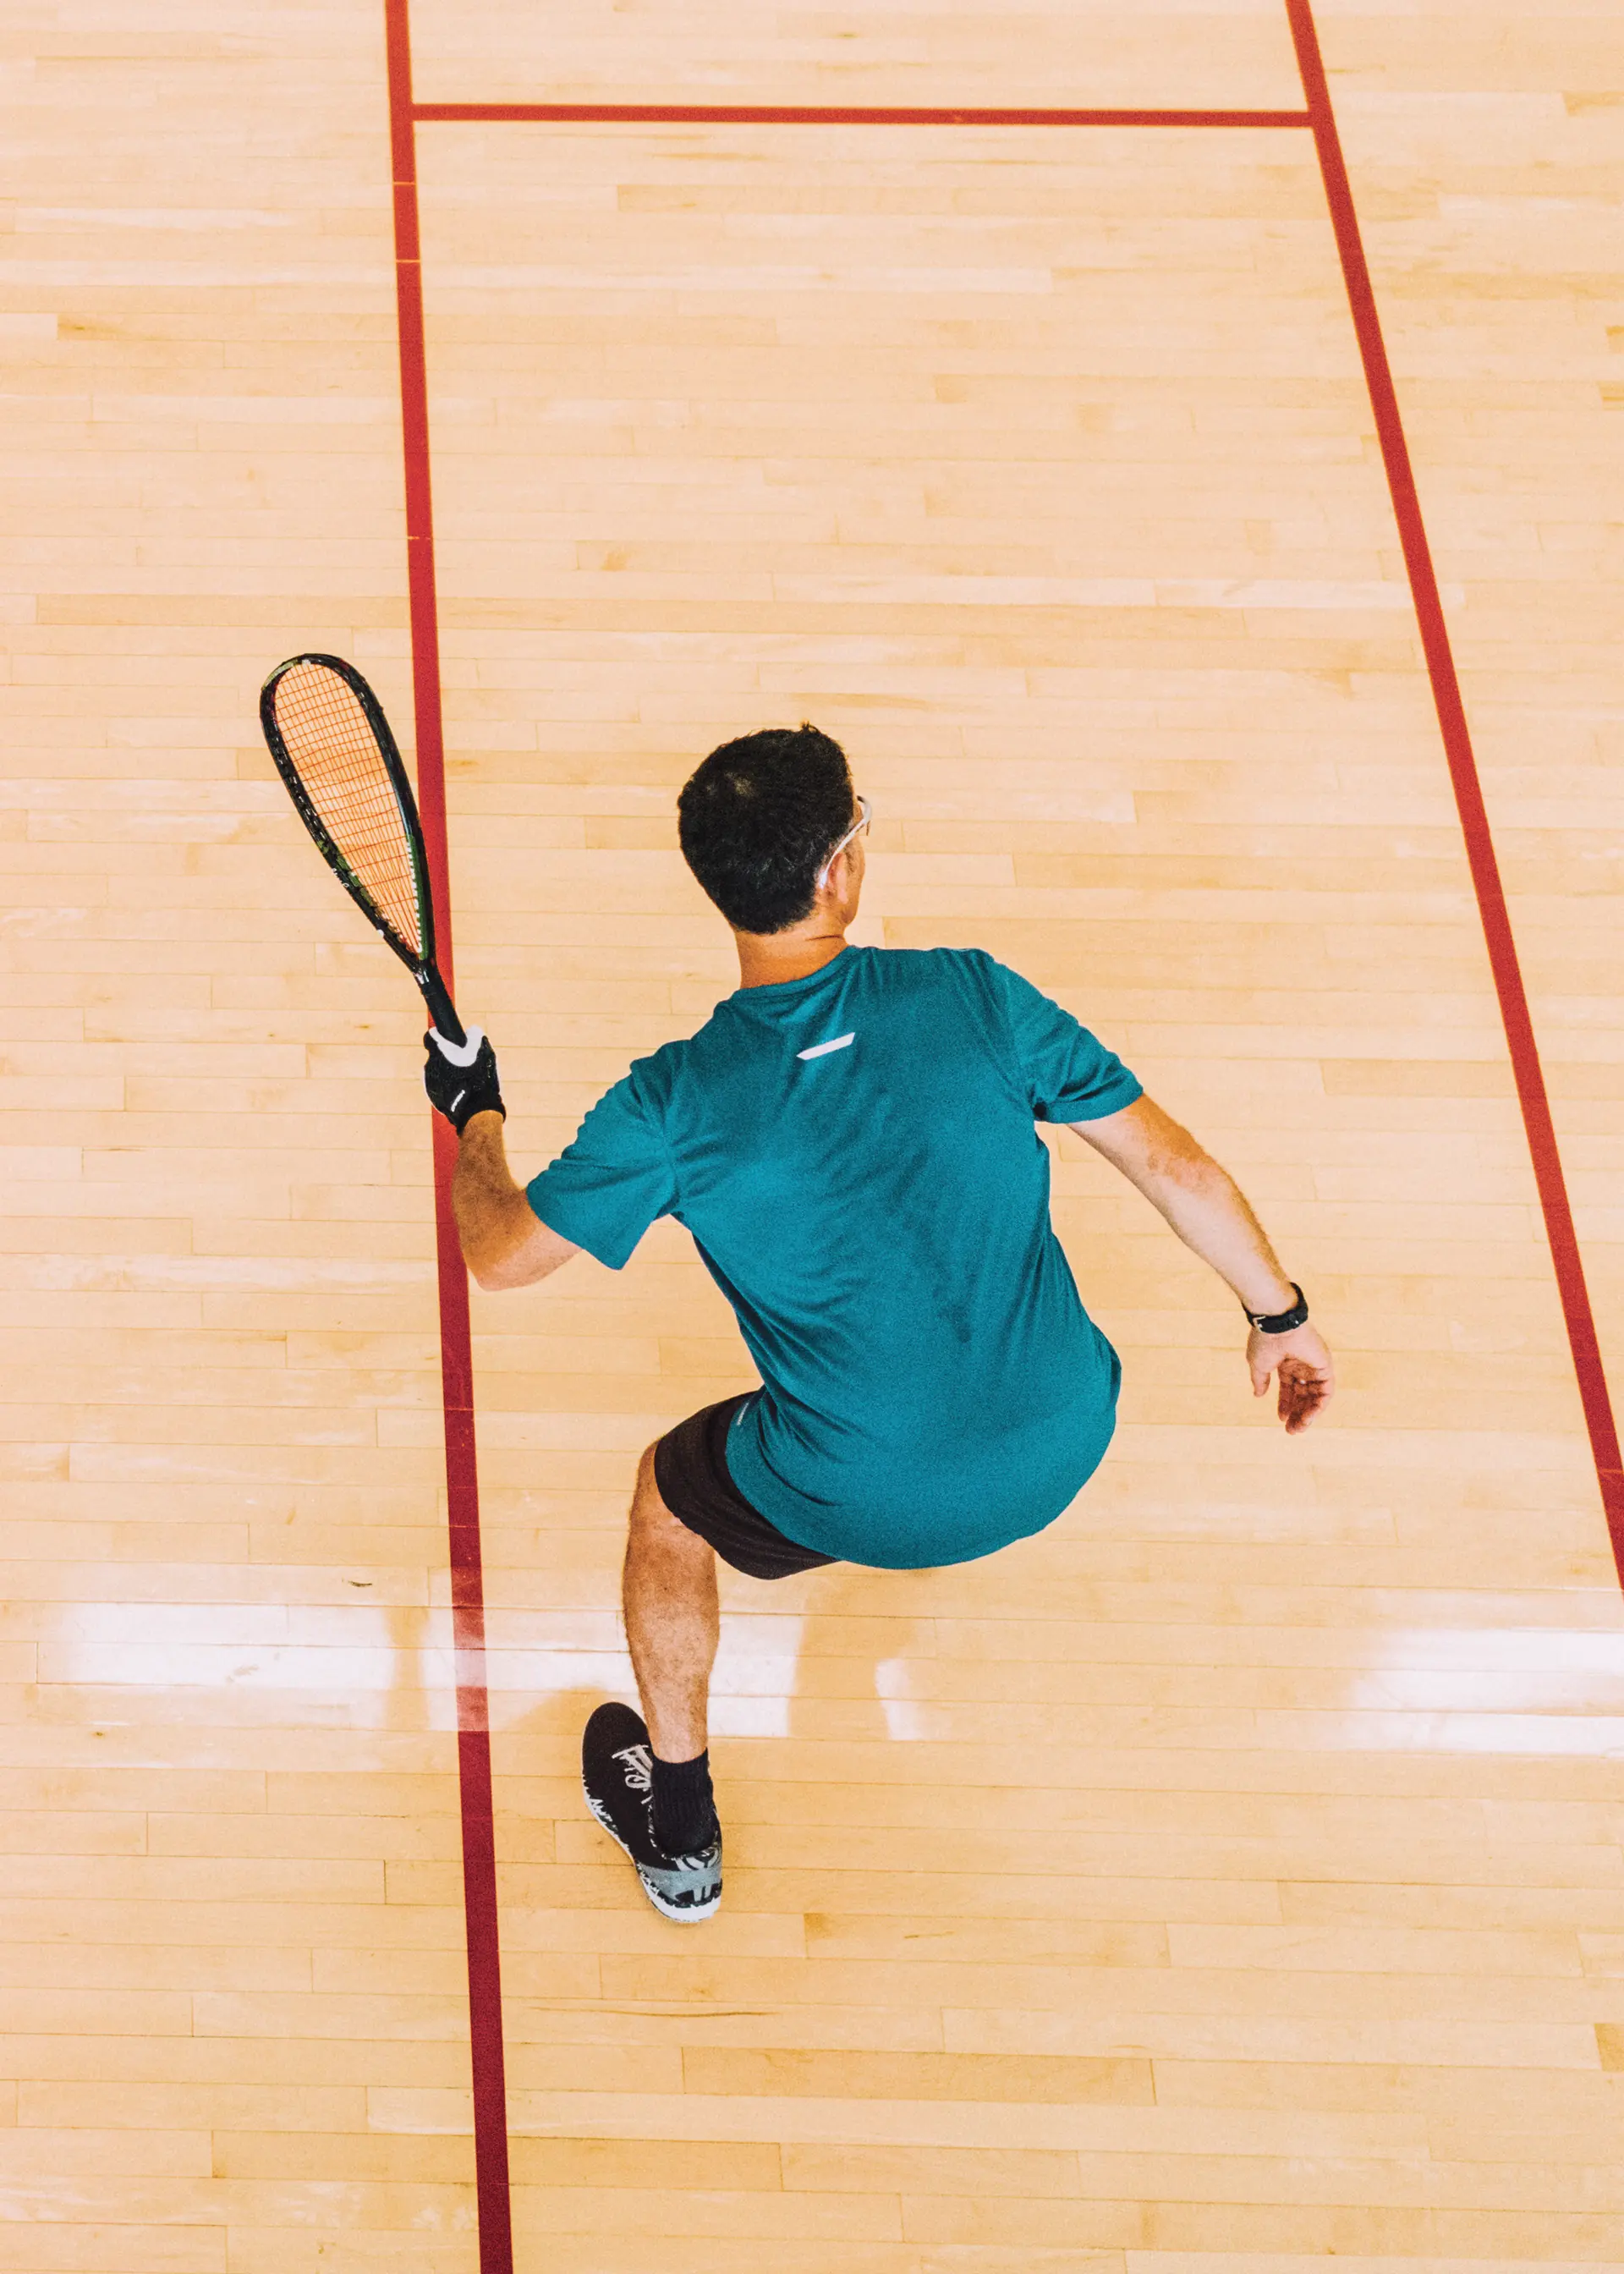 Aerial view of a person holding a racquet on an indoor court.